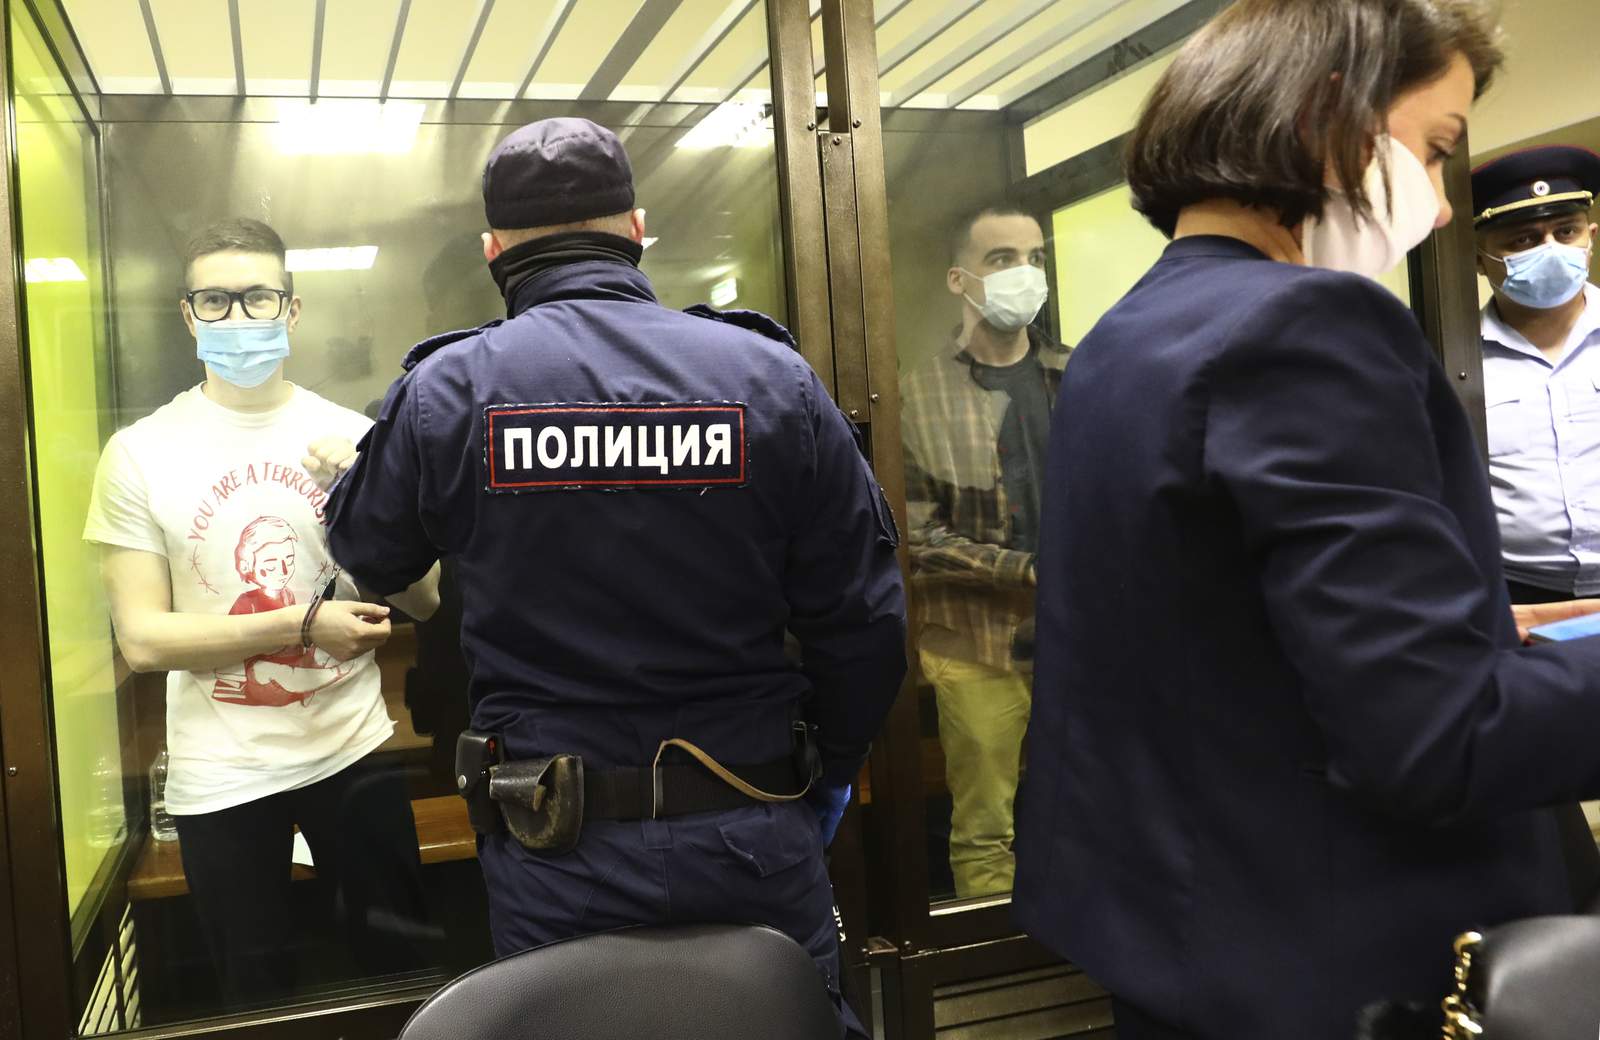 Russian court hands prison terms to youth group members